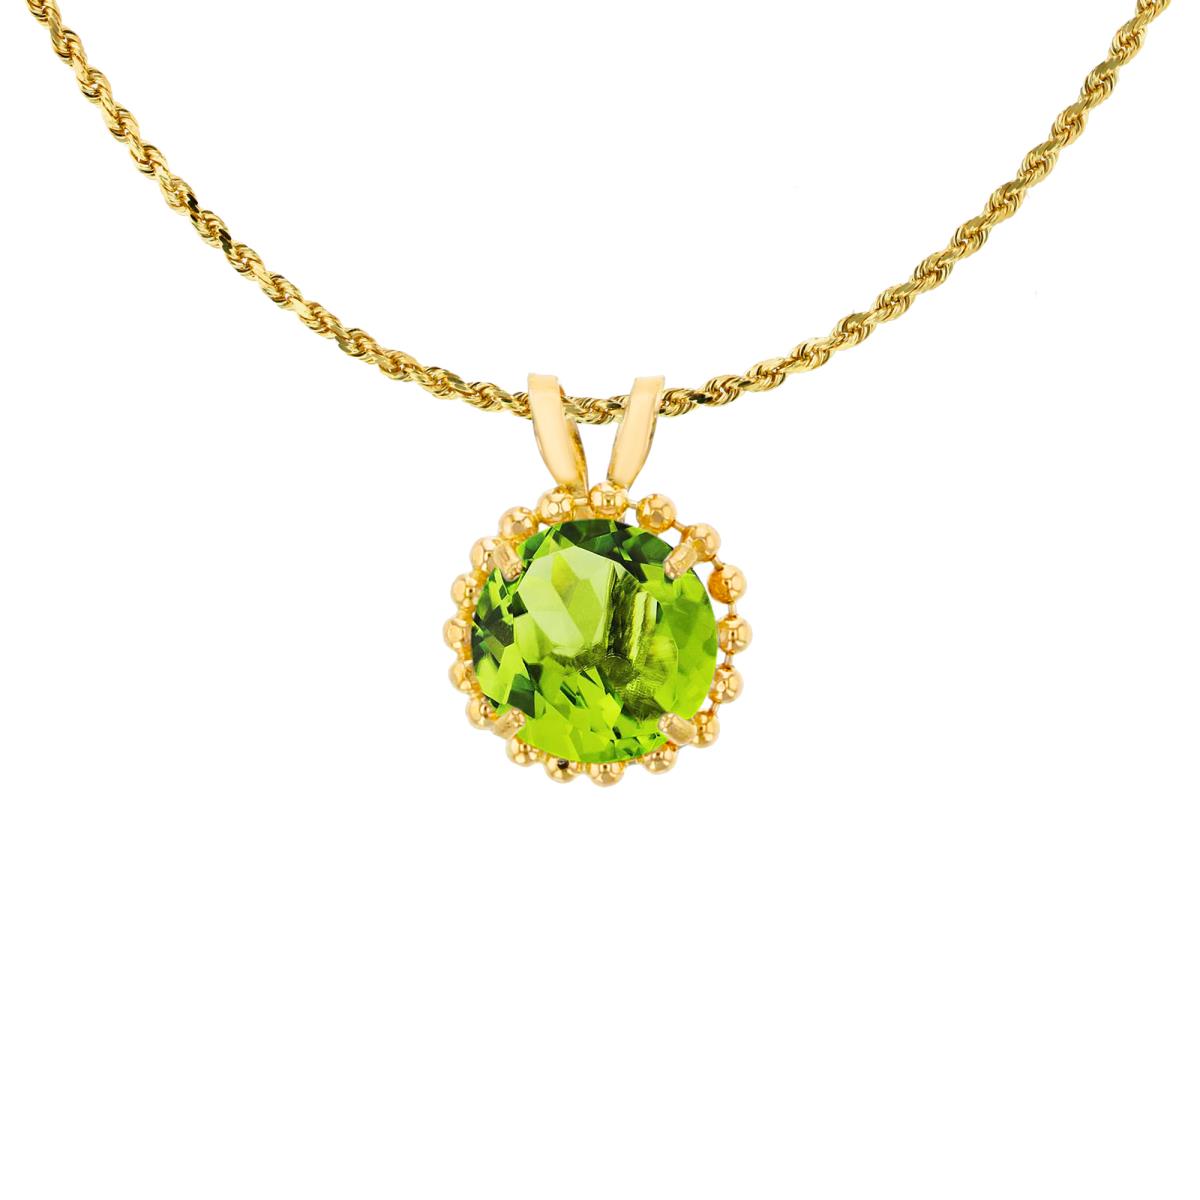 10K Yellow Gold 6mm Rd Cut Peridot with Bead Frame Rabbit Ear 18" Necklace